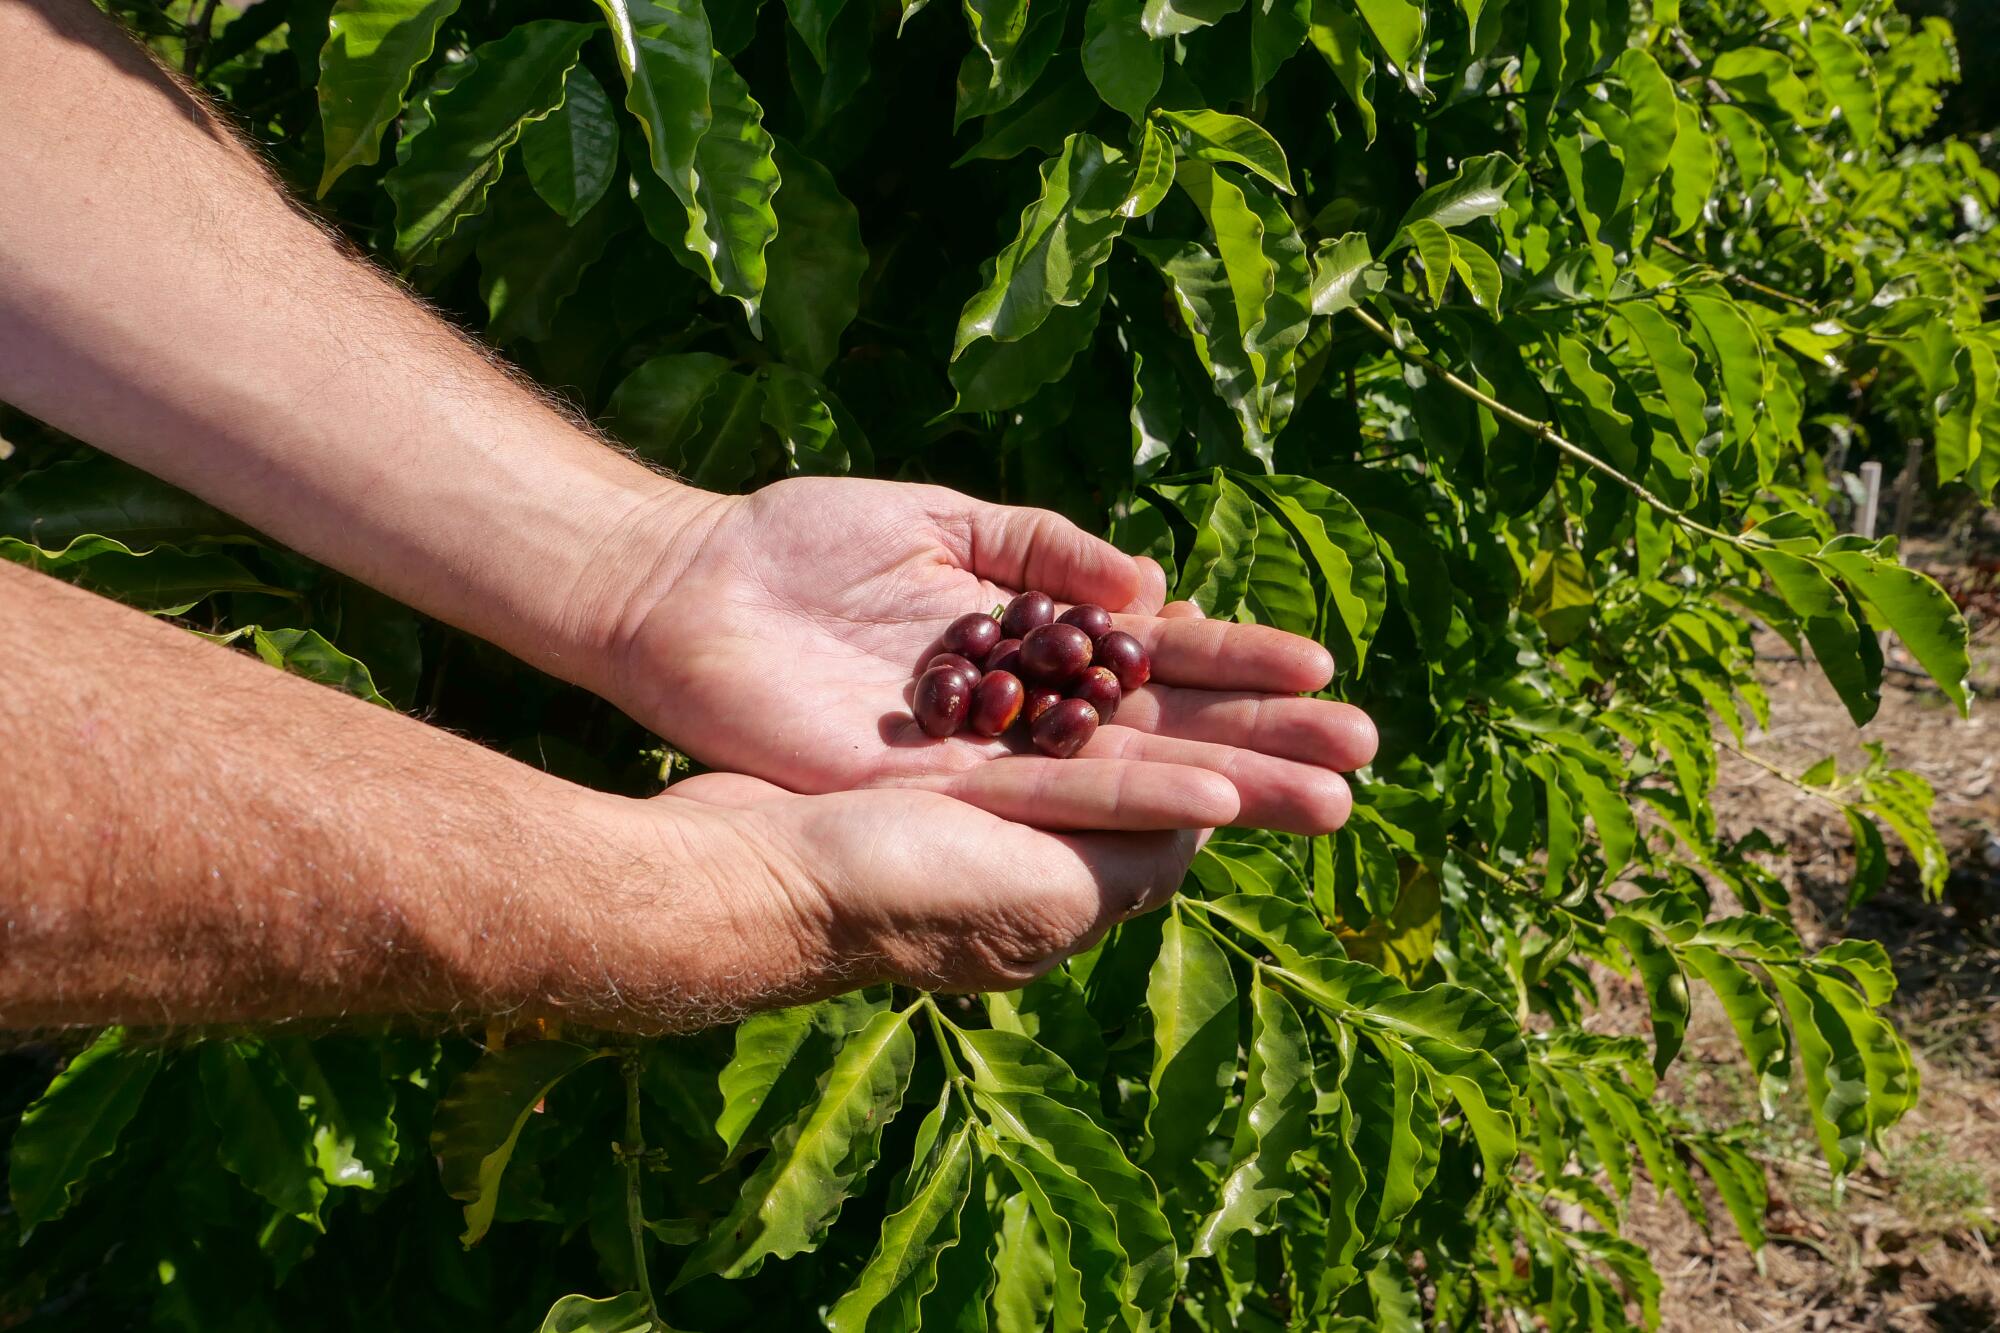 Hands with coffee beans in one palm in front of coffee plants